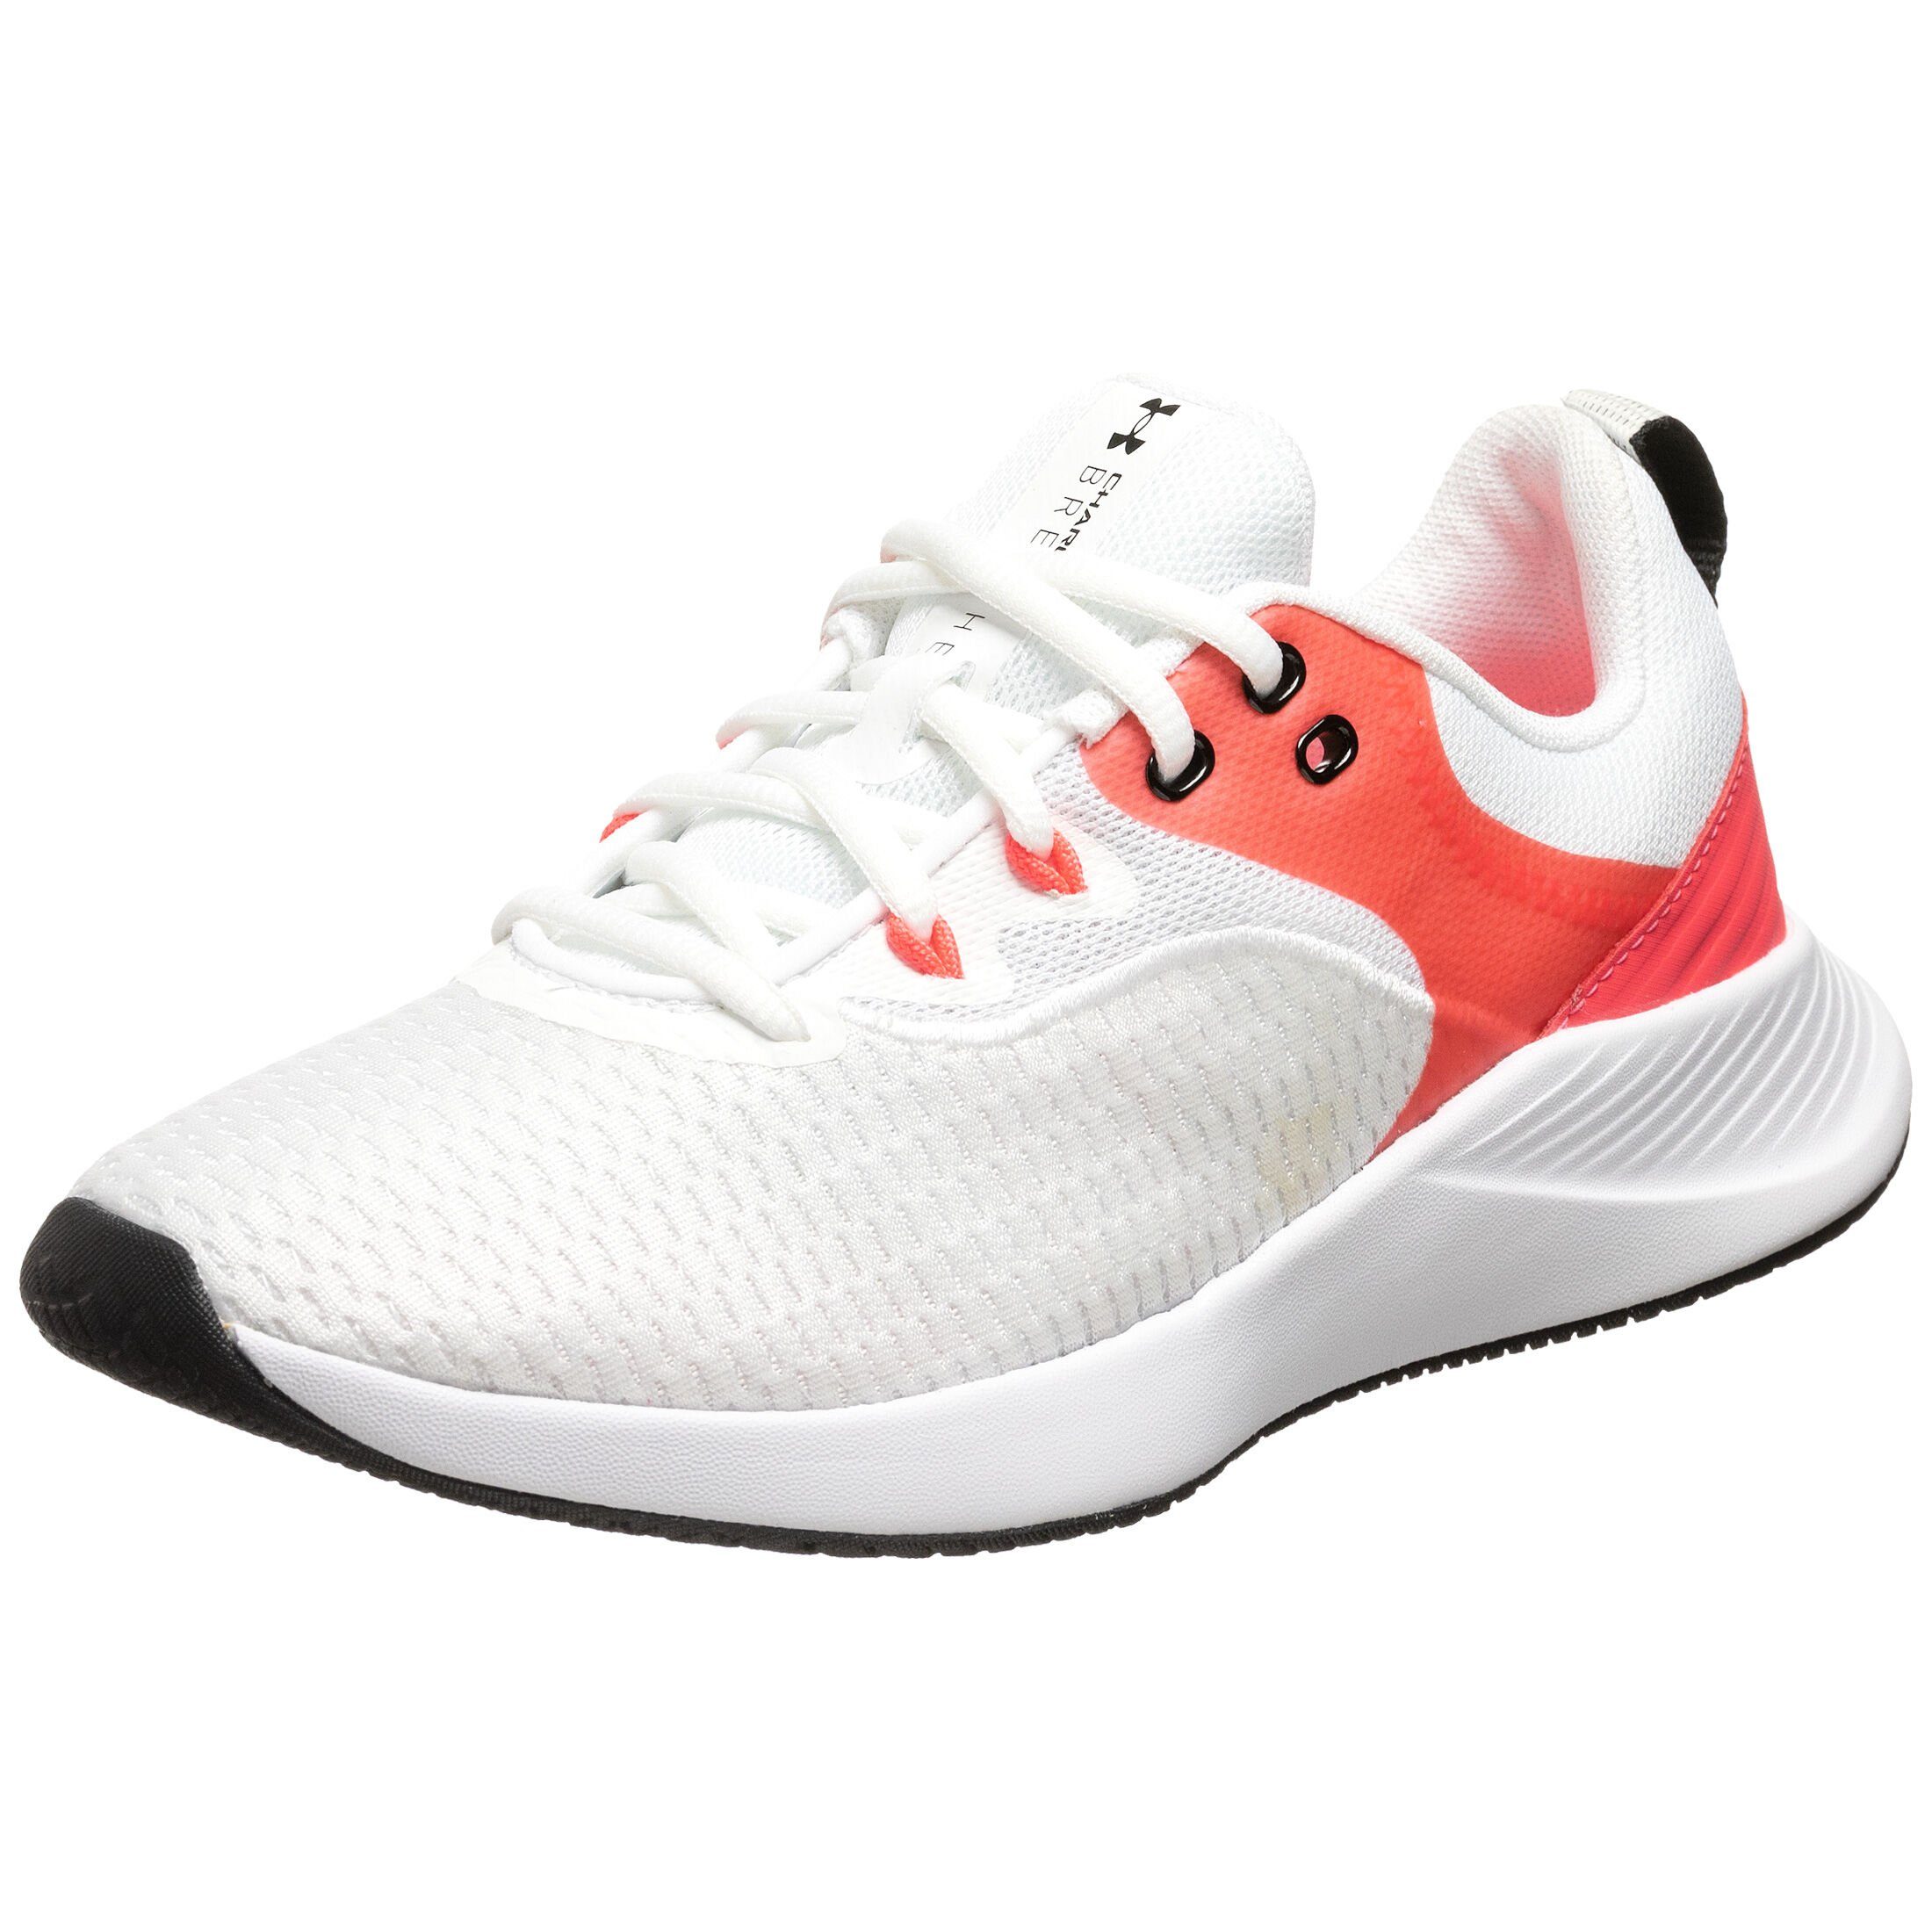 Under Armour® Charged Breathe TR 3 Trainingsschuh Damen Trainingsschuh